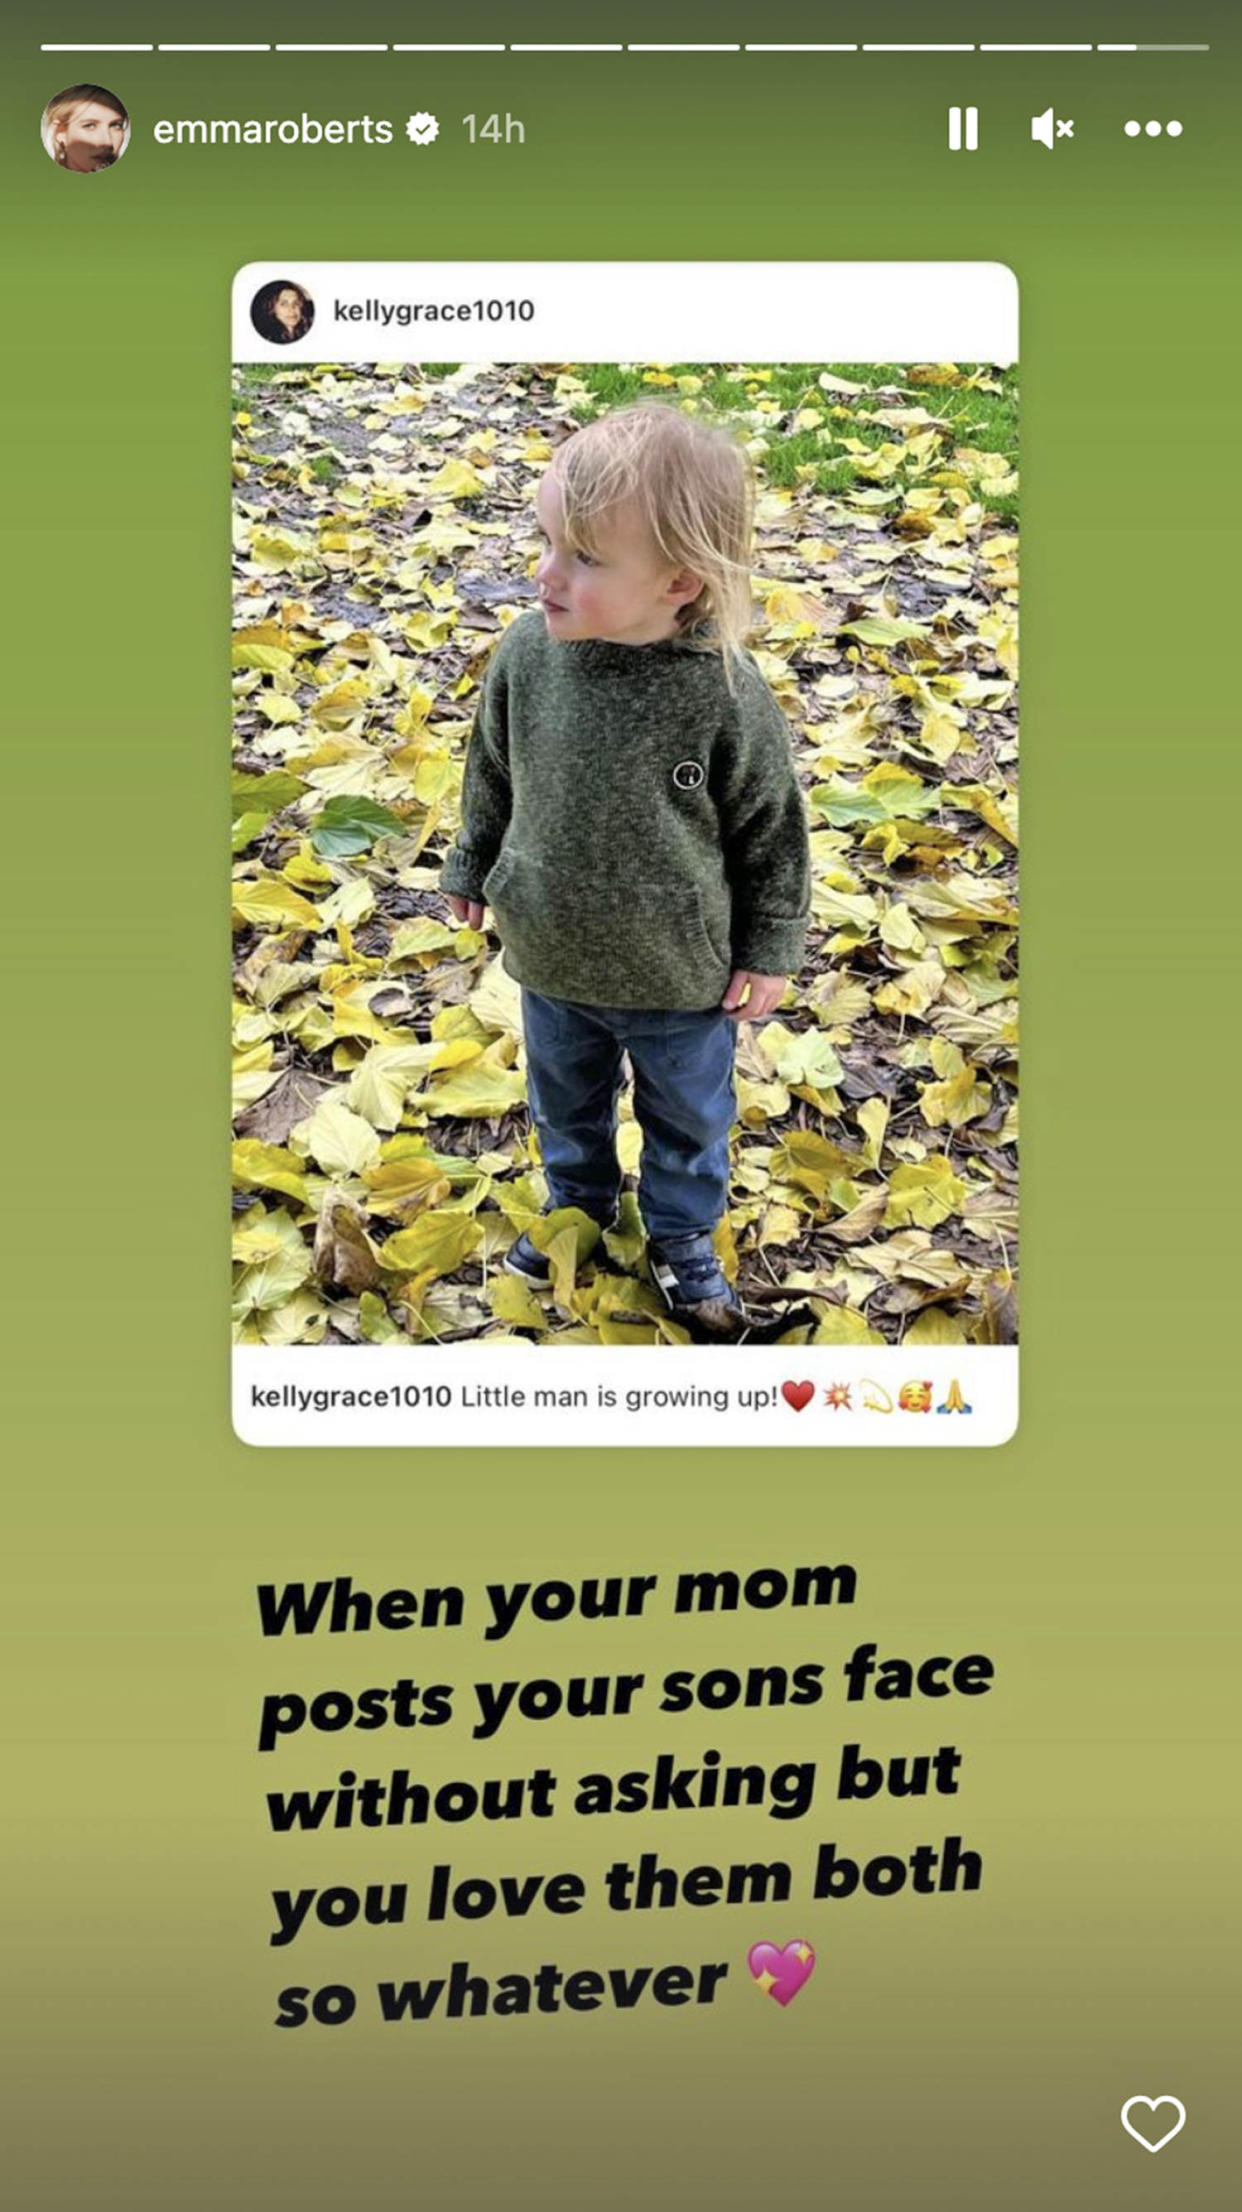 Emma Roberts shared this photo of her son after her mother did the same. (@emmaroberts via Instagram)